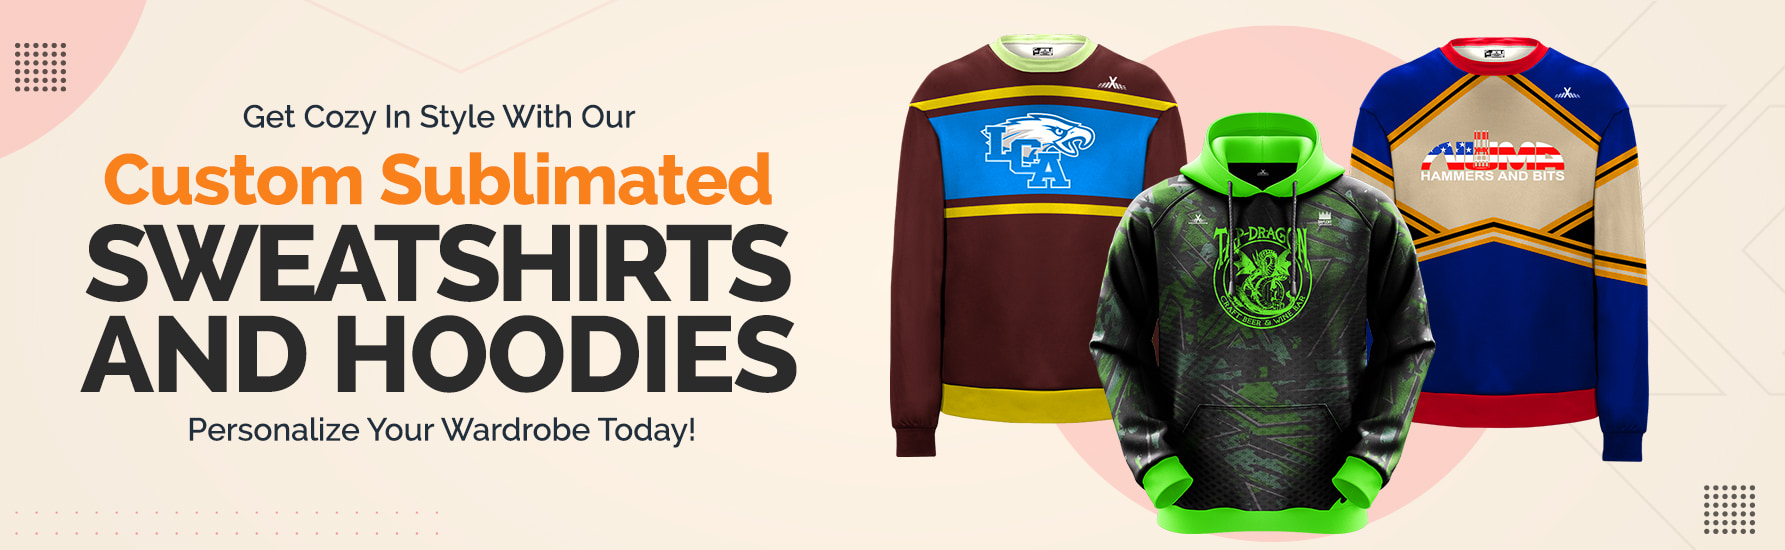 Personalize Your Style with Custom Sweatshirts and Hoodies